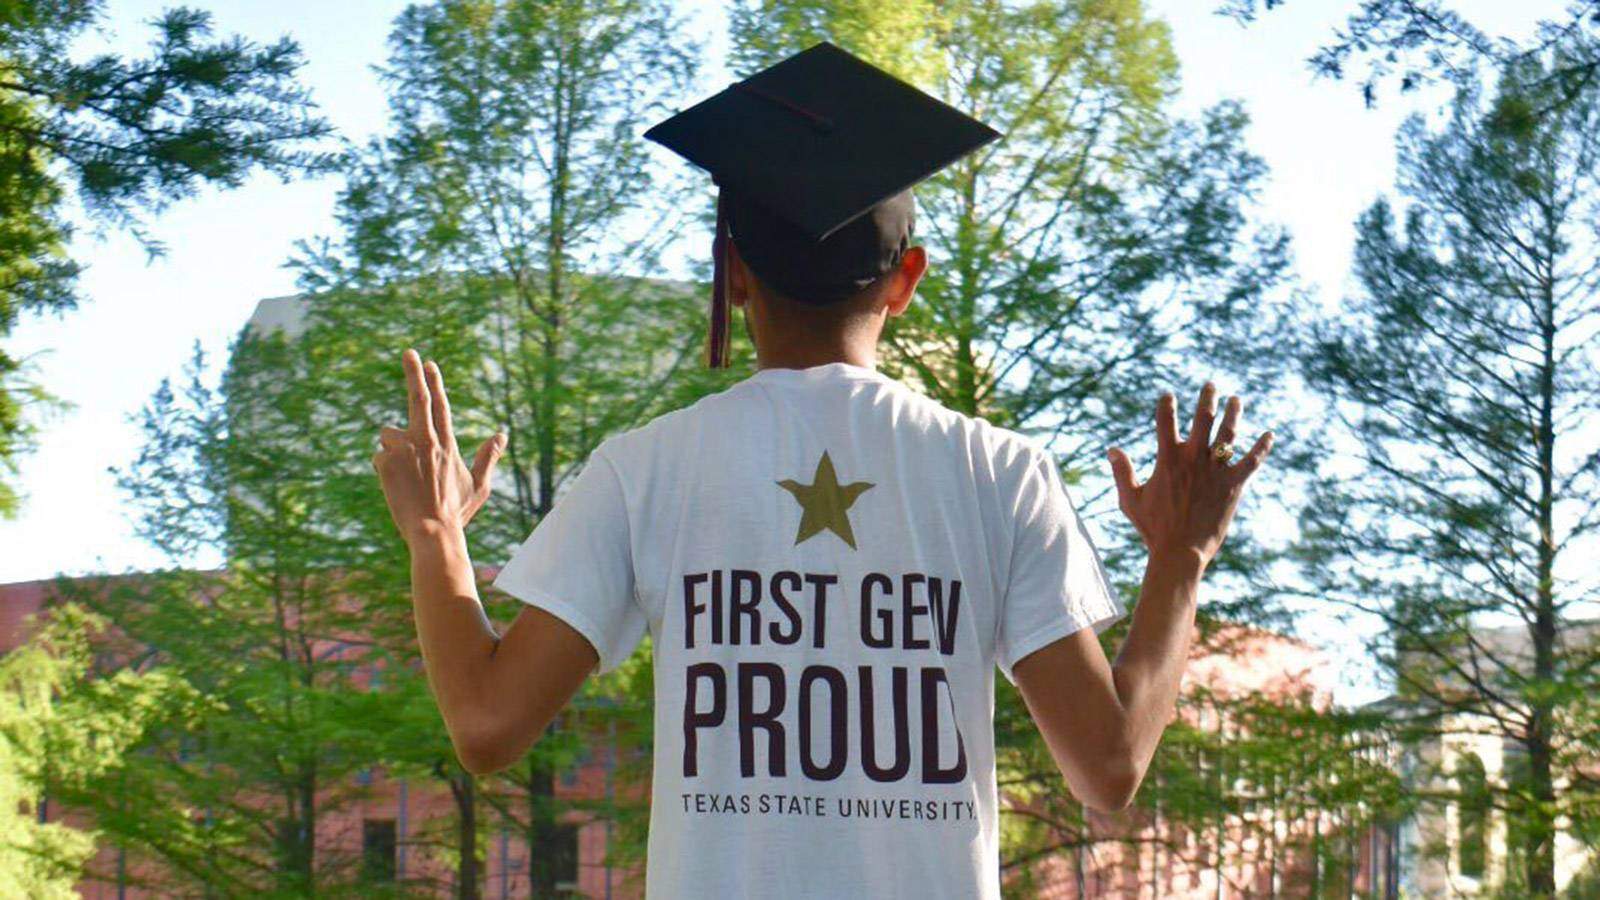 Student facing away wearing First-Gen Proud shirt and making Texas State handsigns.